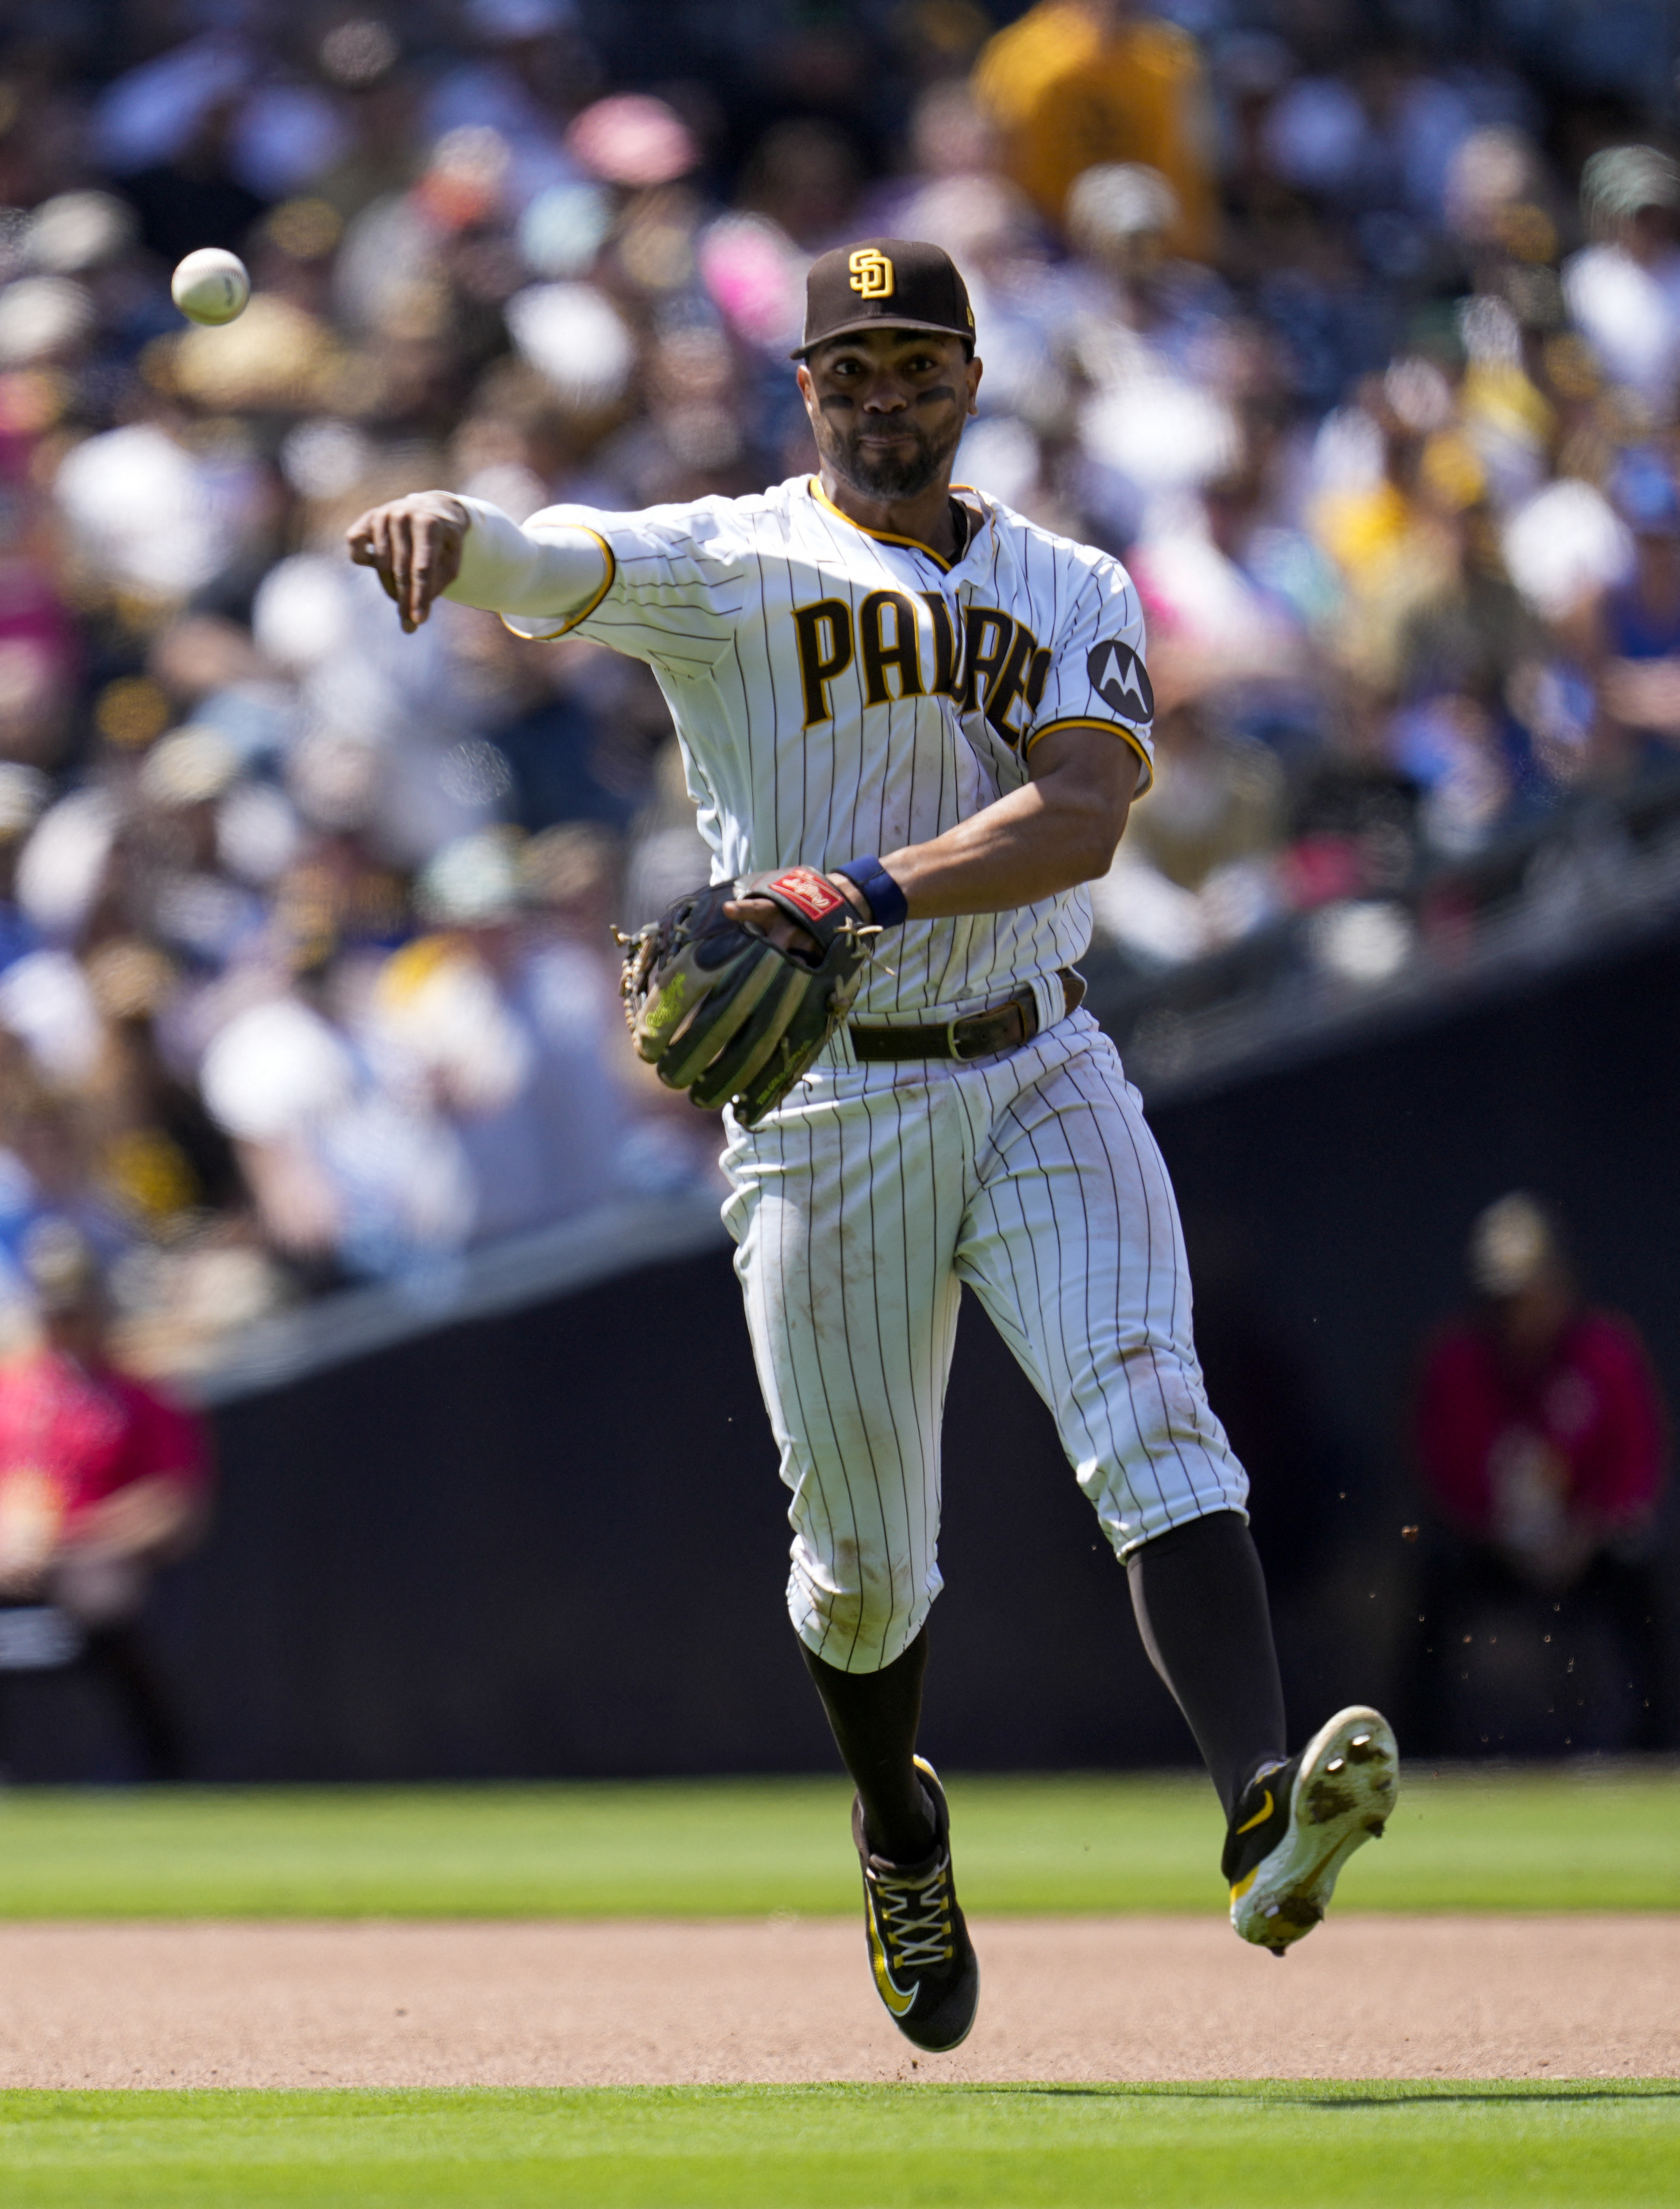 Cronenworth's 2 HRs, 6 RBIs lead Padres past Brewers 10-3